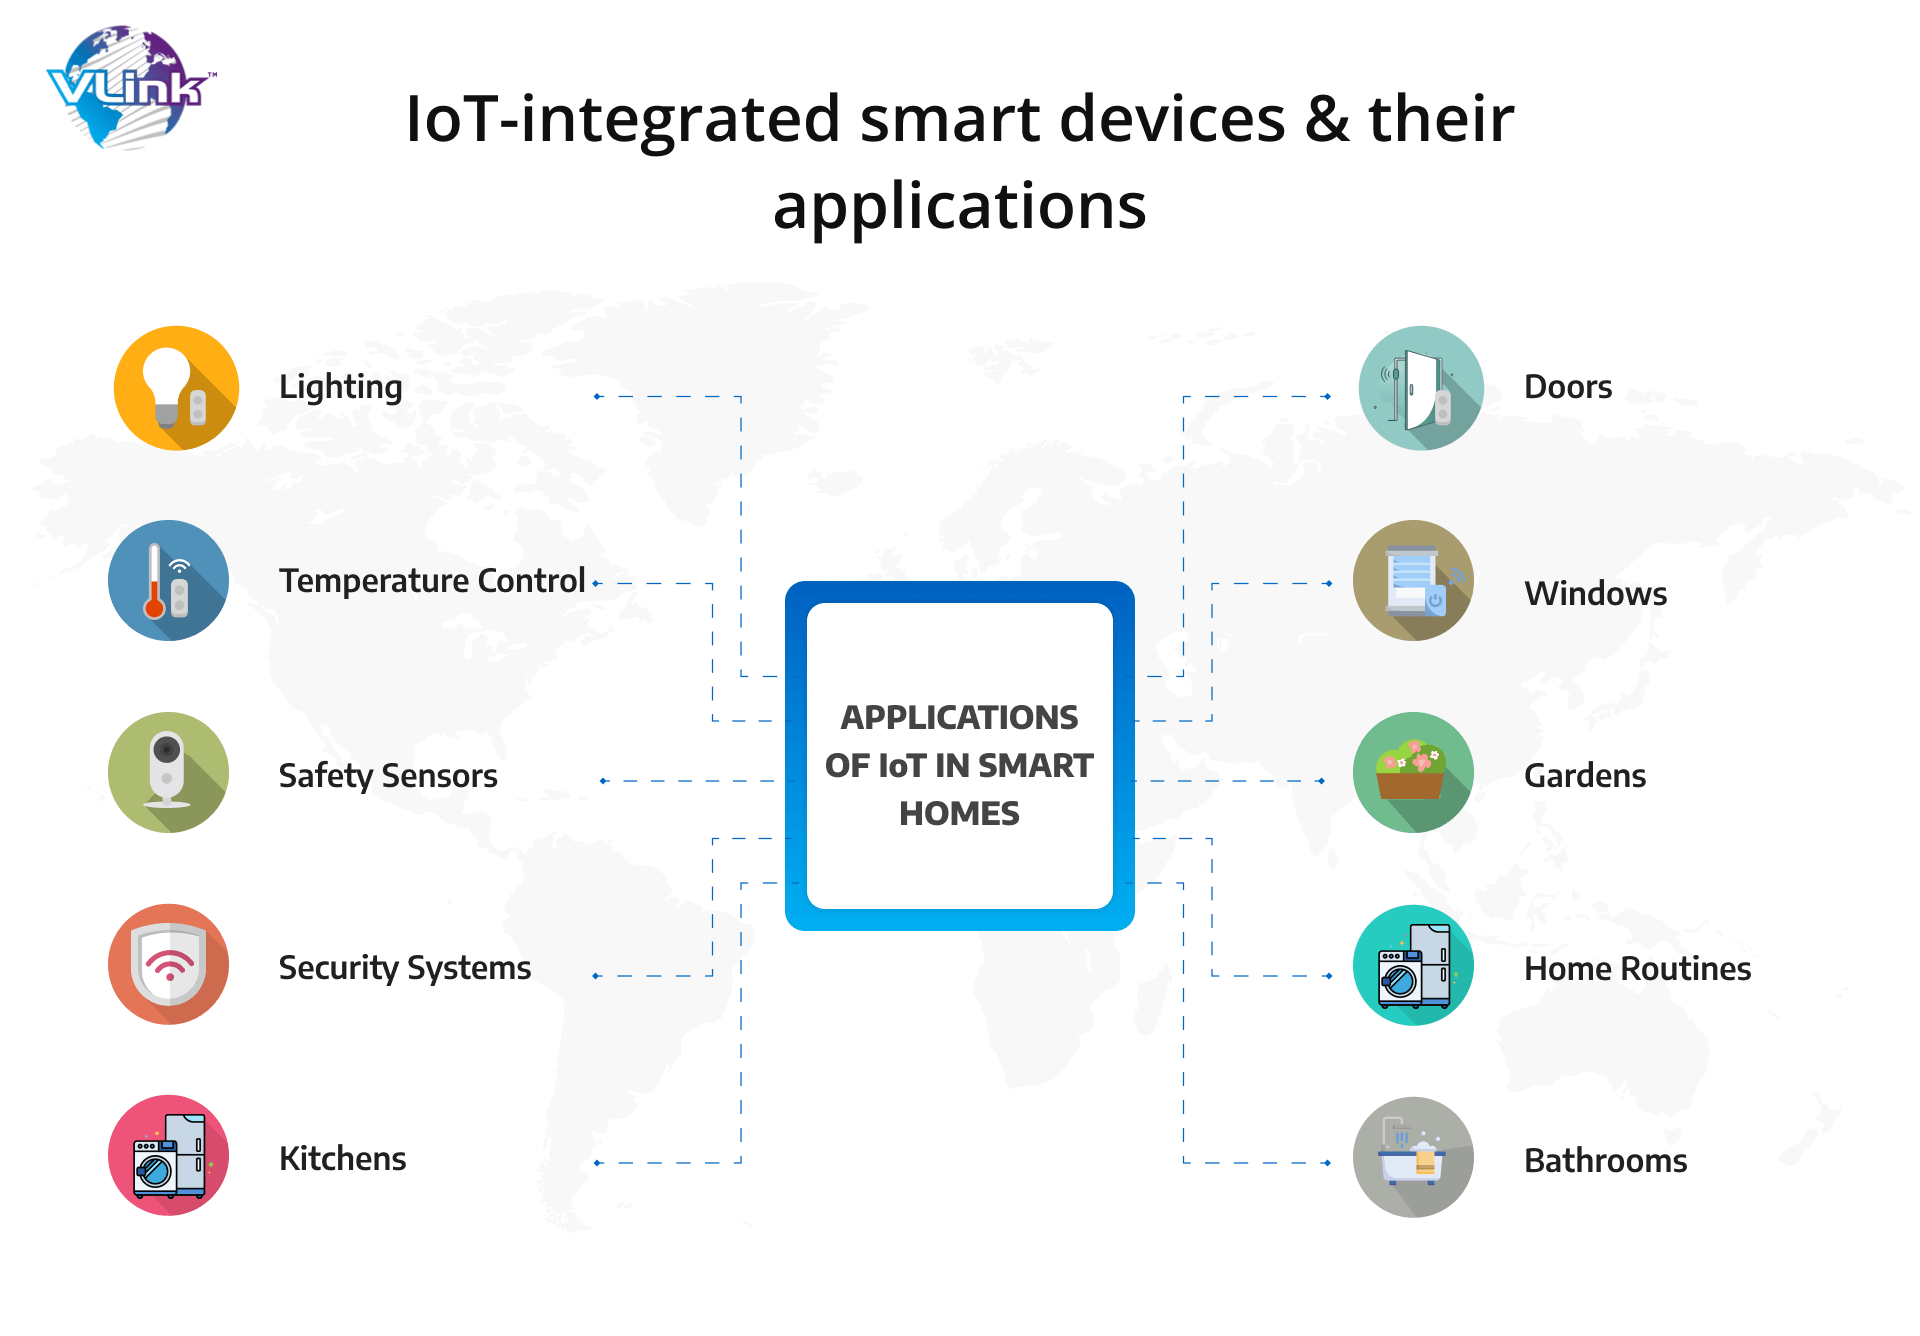 IoT integrated smart devices & their applications